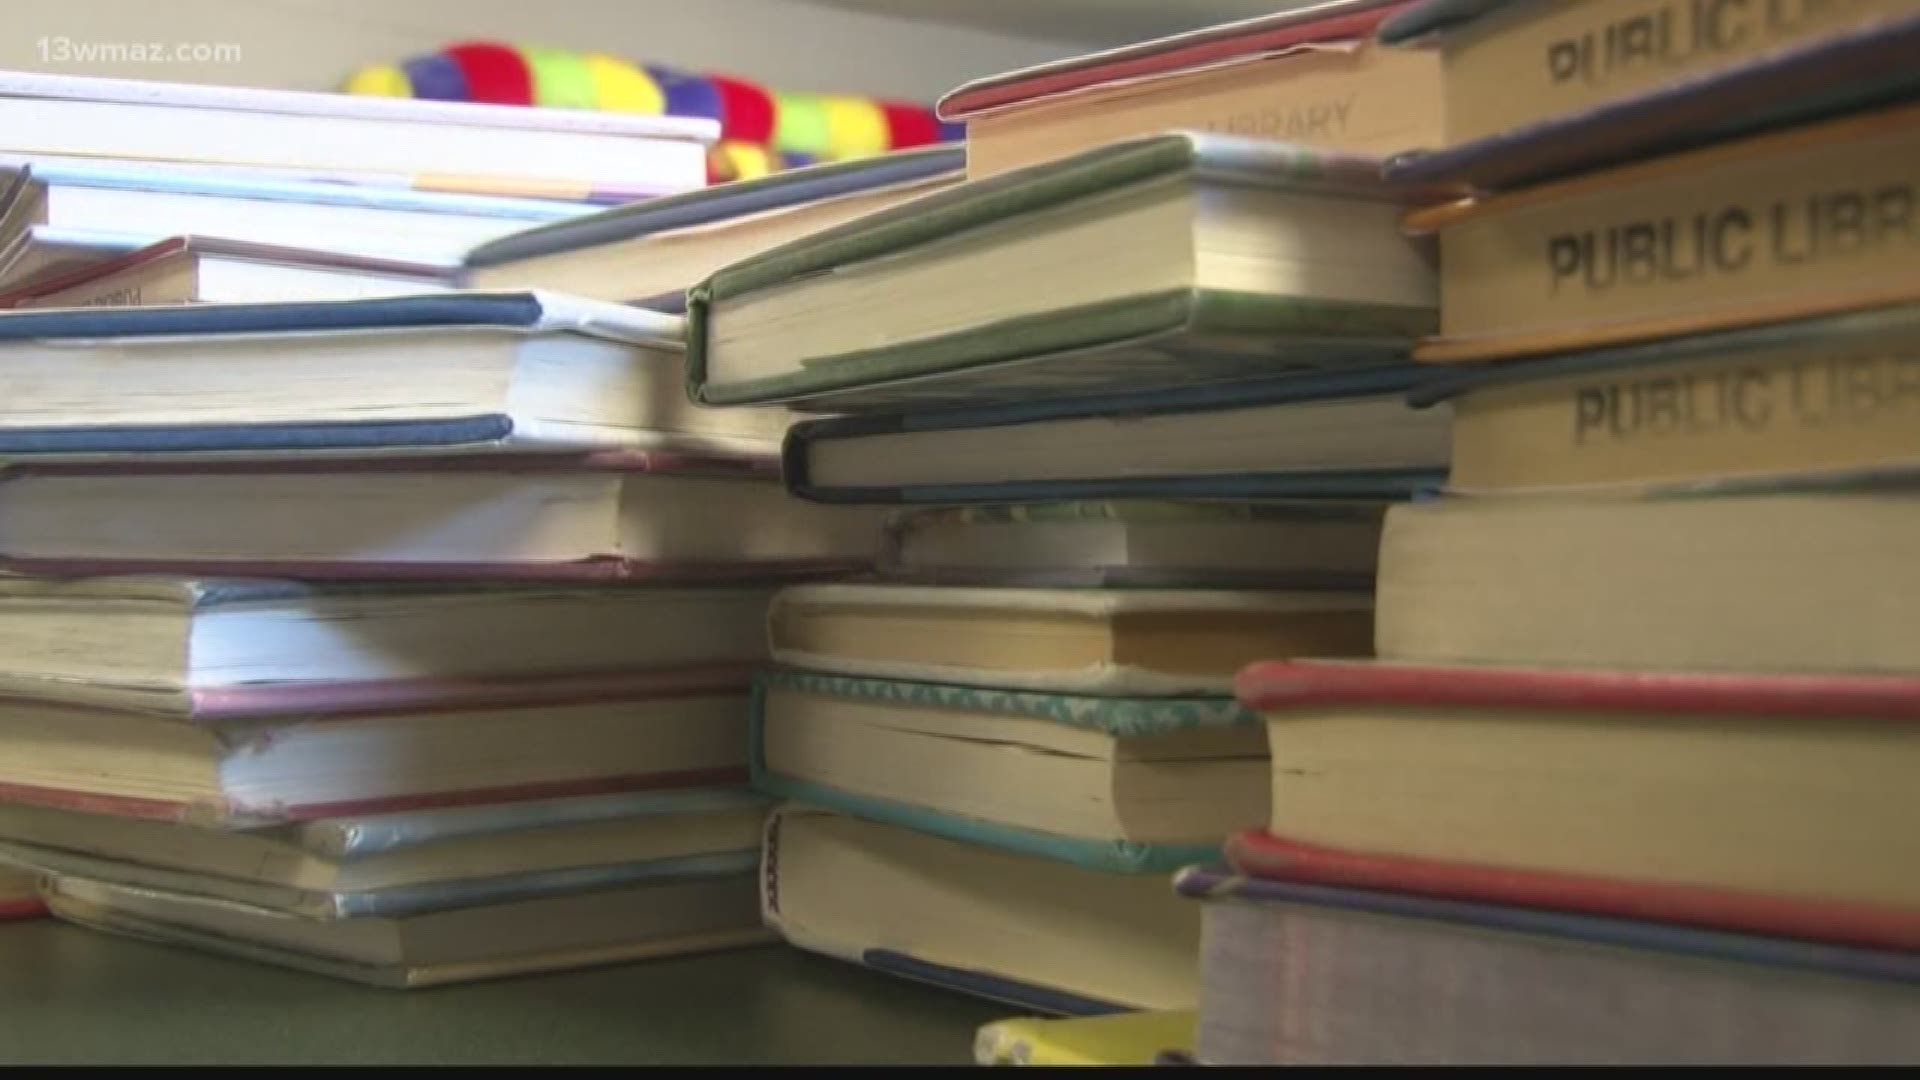 As the Jones County library prepares to move in its newly renovated home, they are asking the public to check out and hold on to books until the opening.